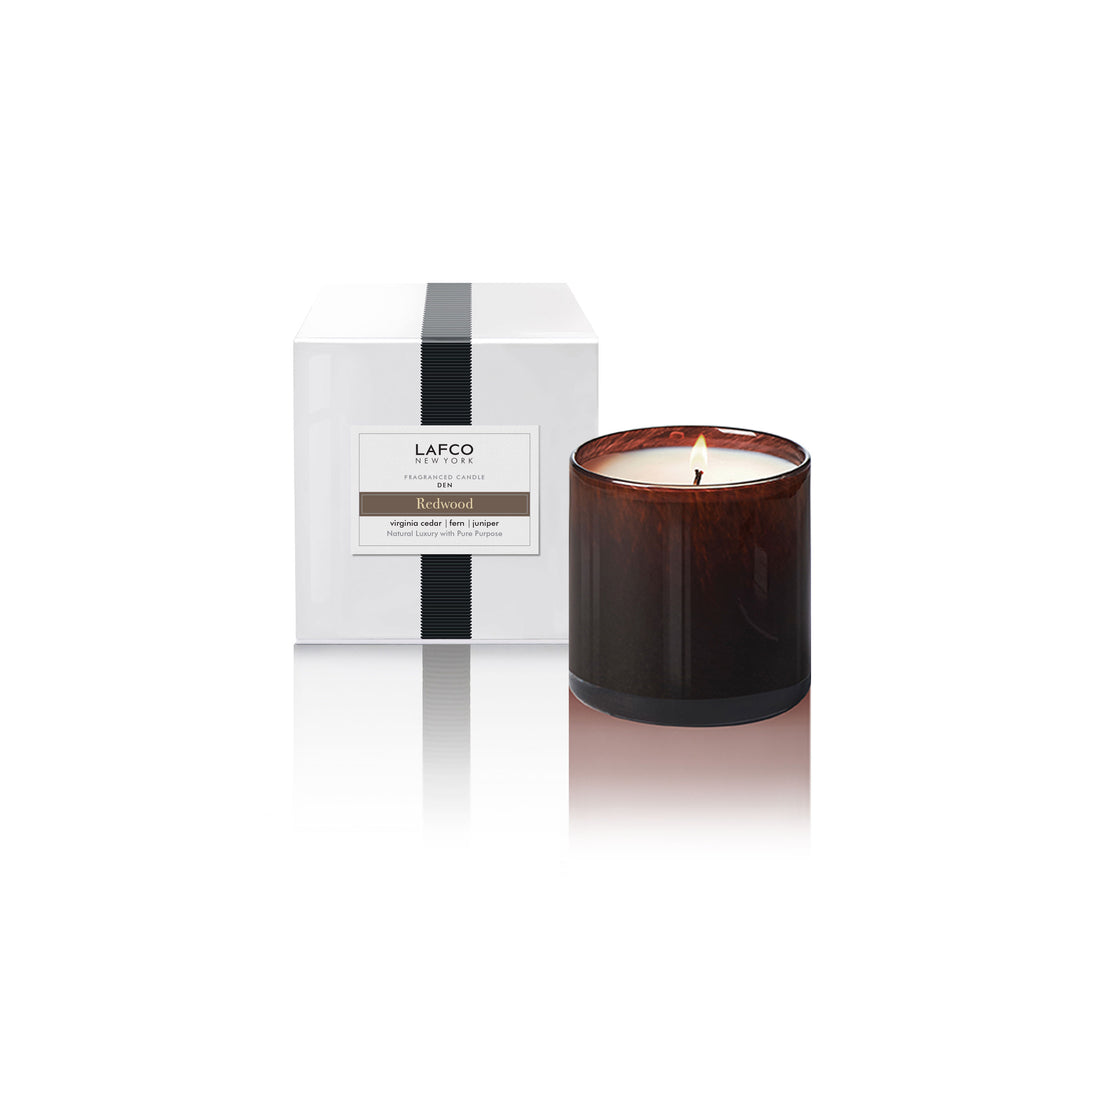 Redwood - LAFCO Candle